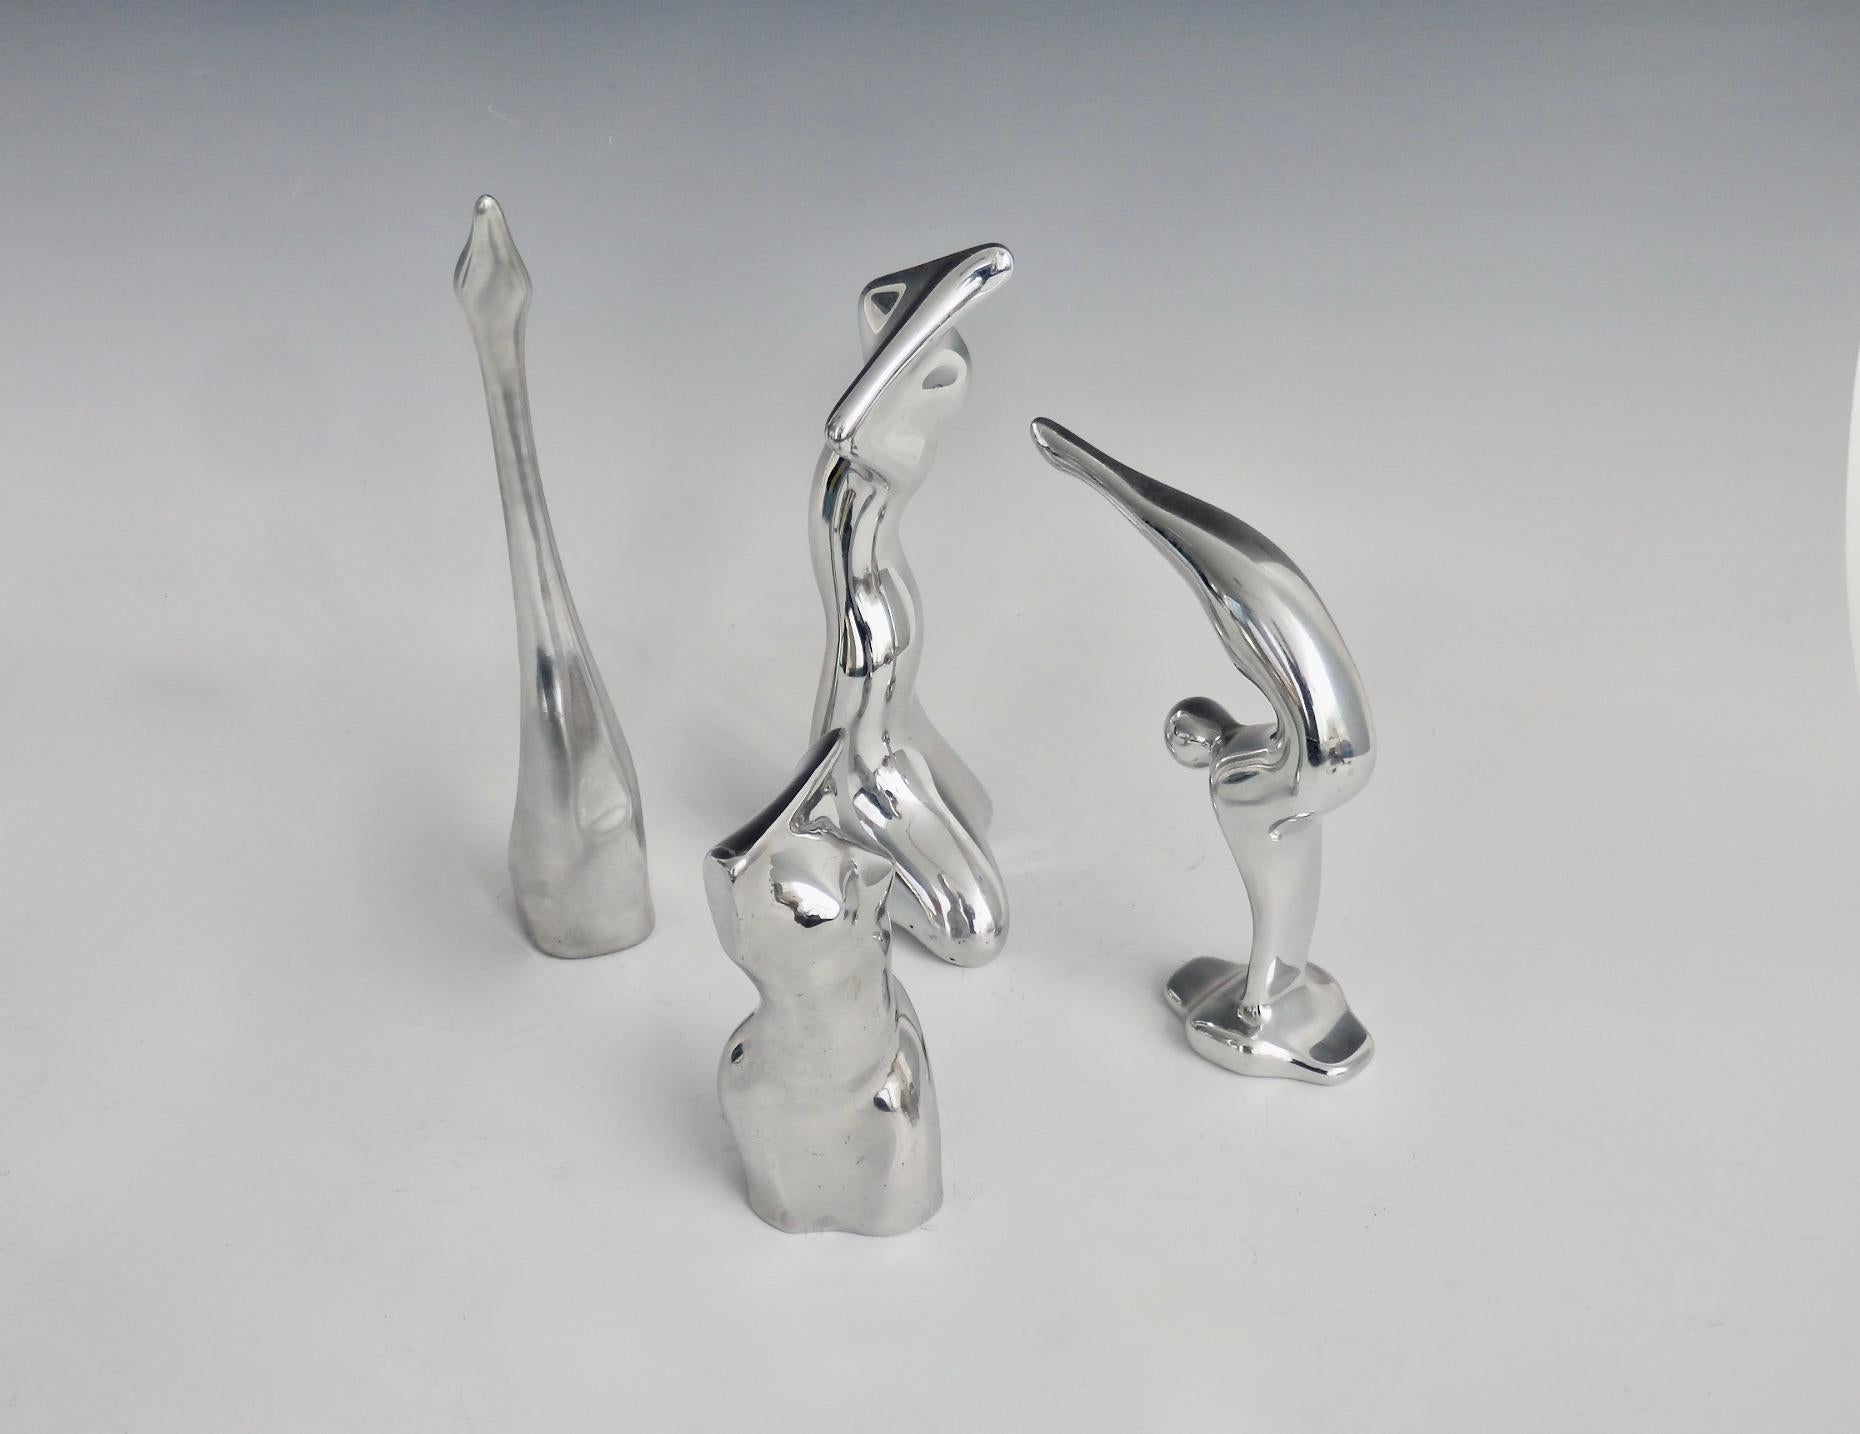 Canadian Four Piece Collection of Polished Aluminum Stylized Figures by Hoselton